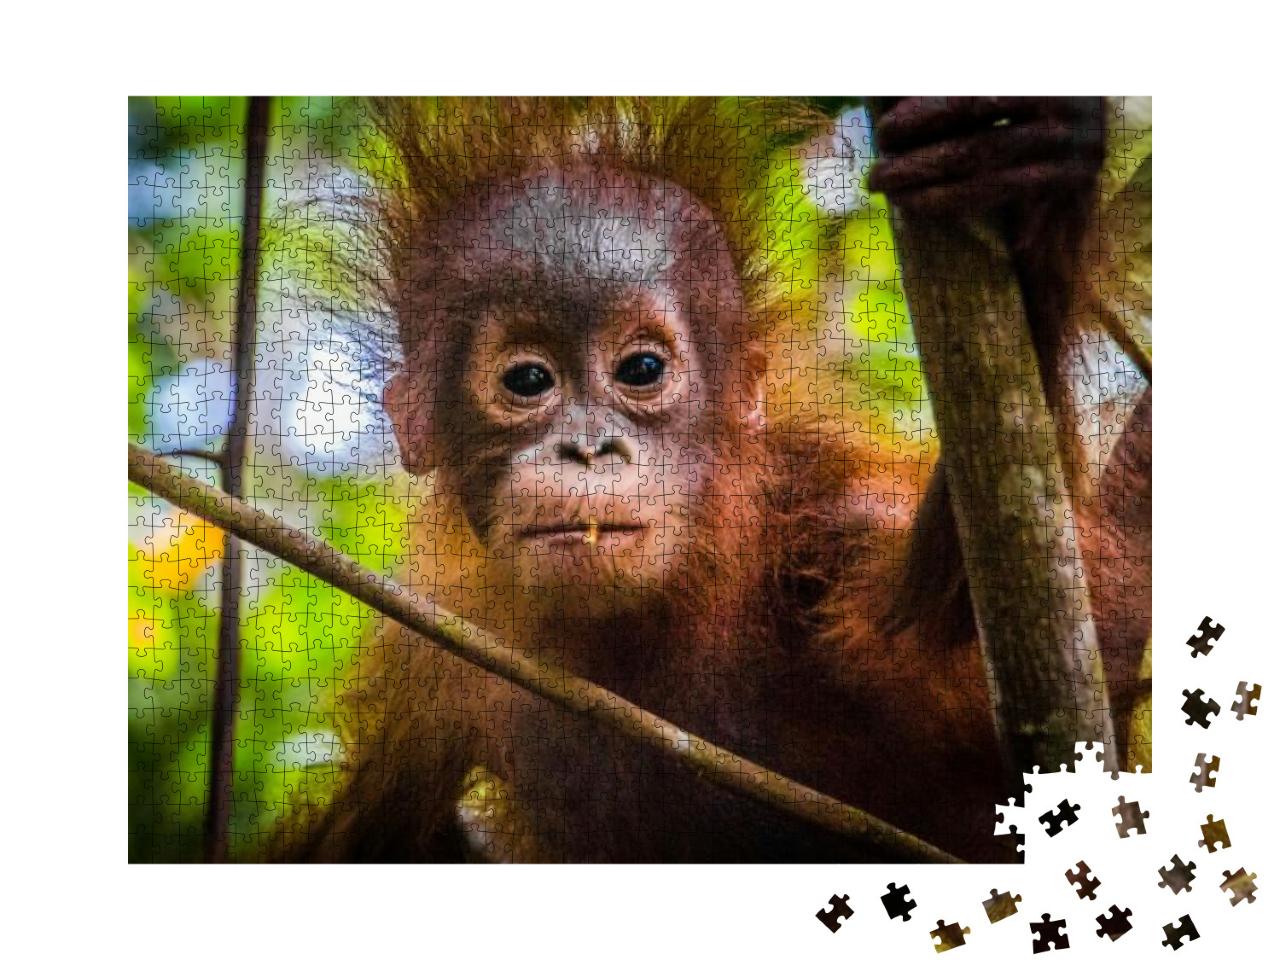 Worlds Cutest Baby Orangutan Looks Into Camera in Borneo... Jigsaw Puzzle with 1000 pieces